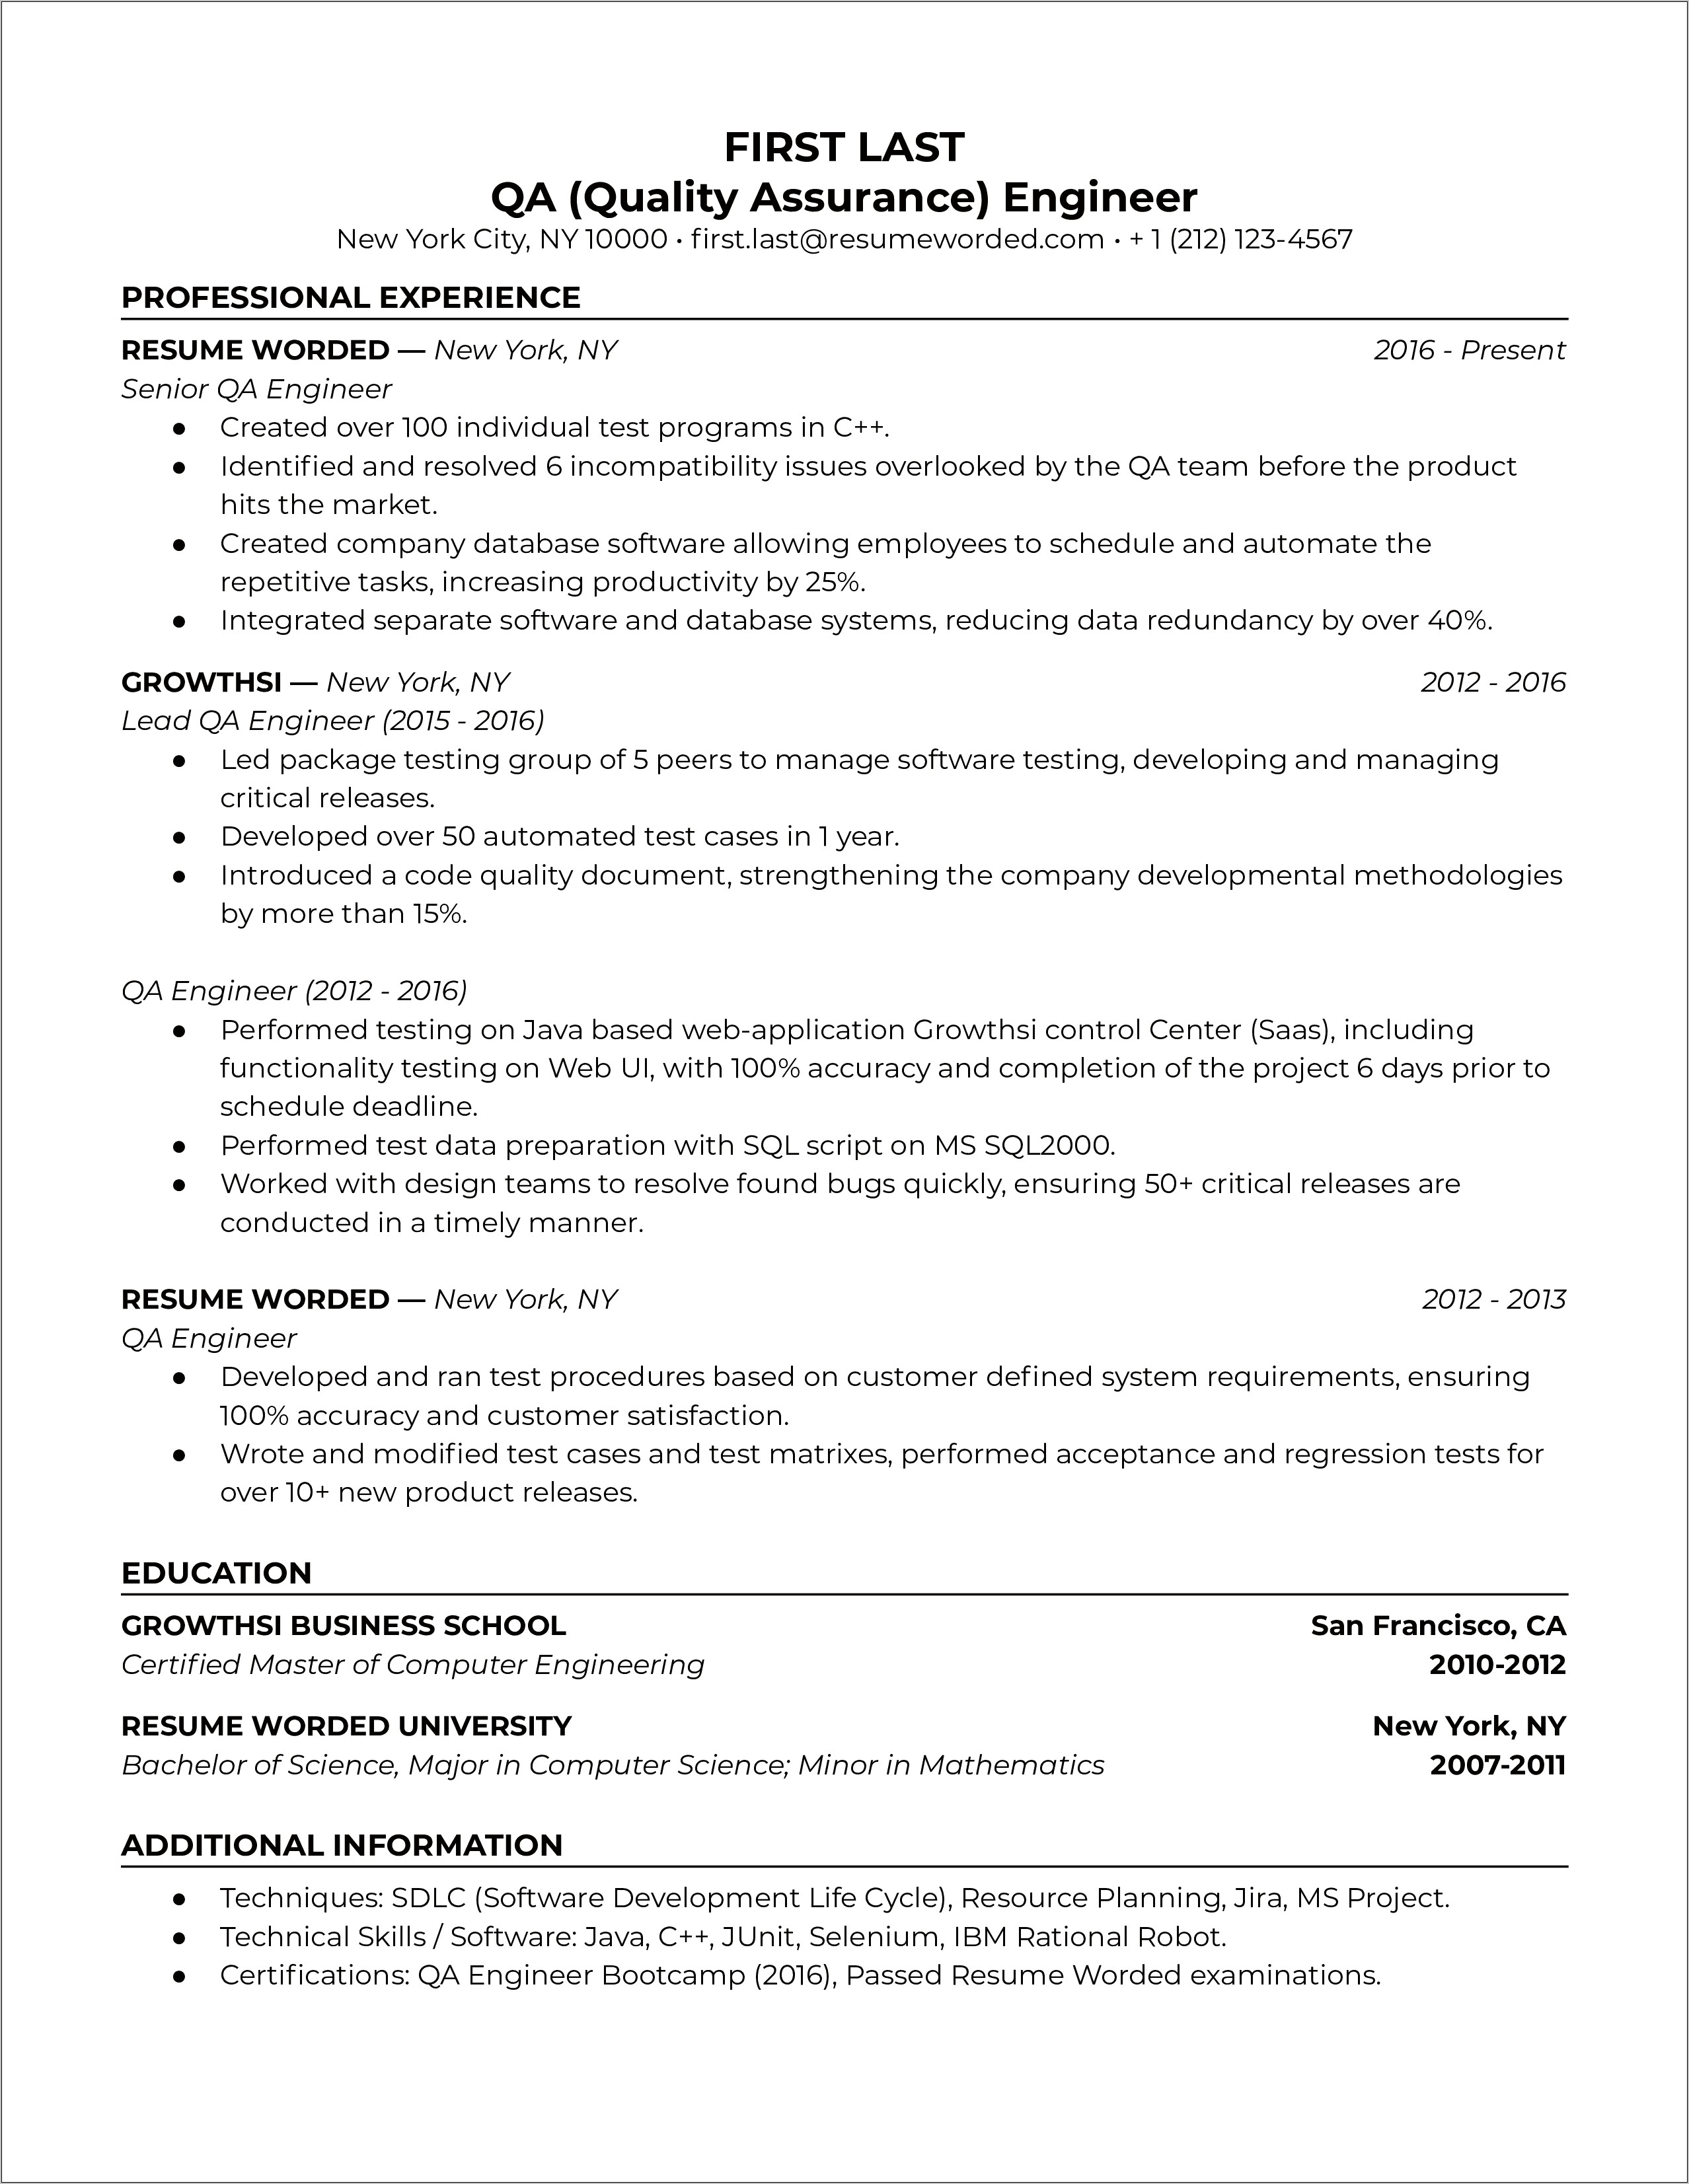 Resume Sample With The Words Midigating And Resolving